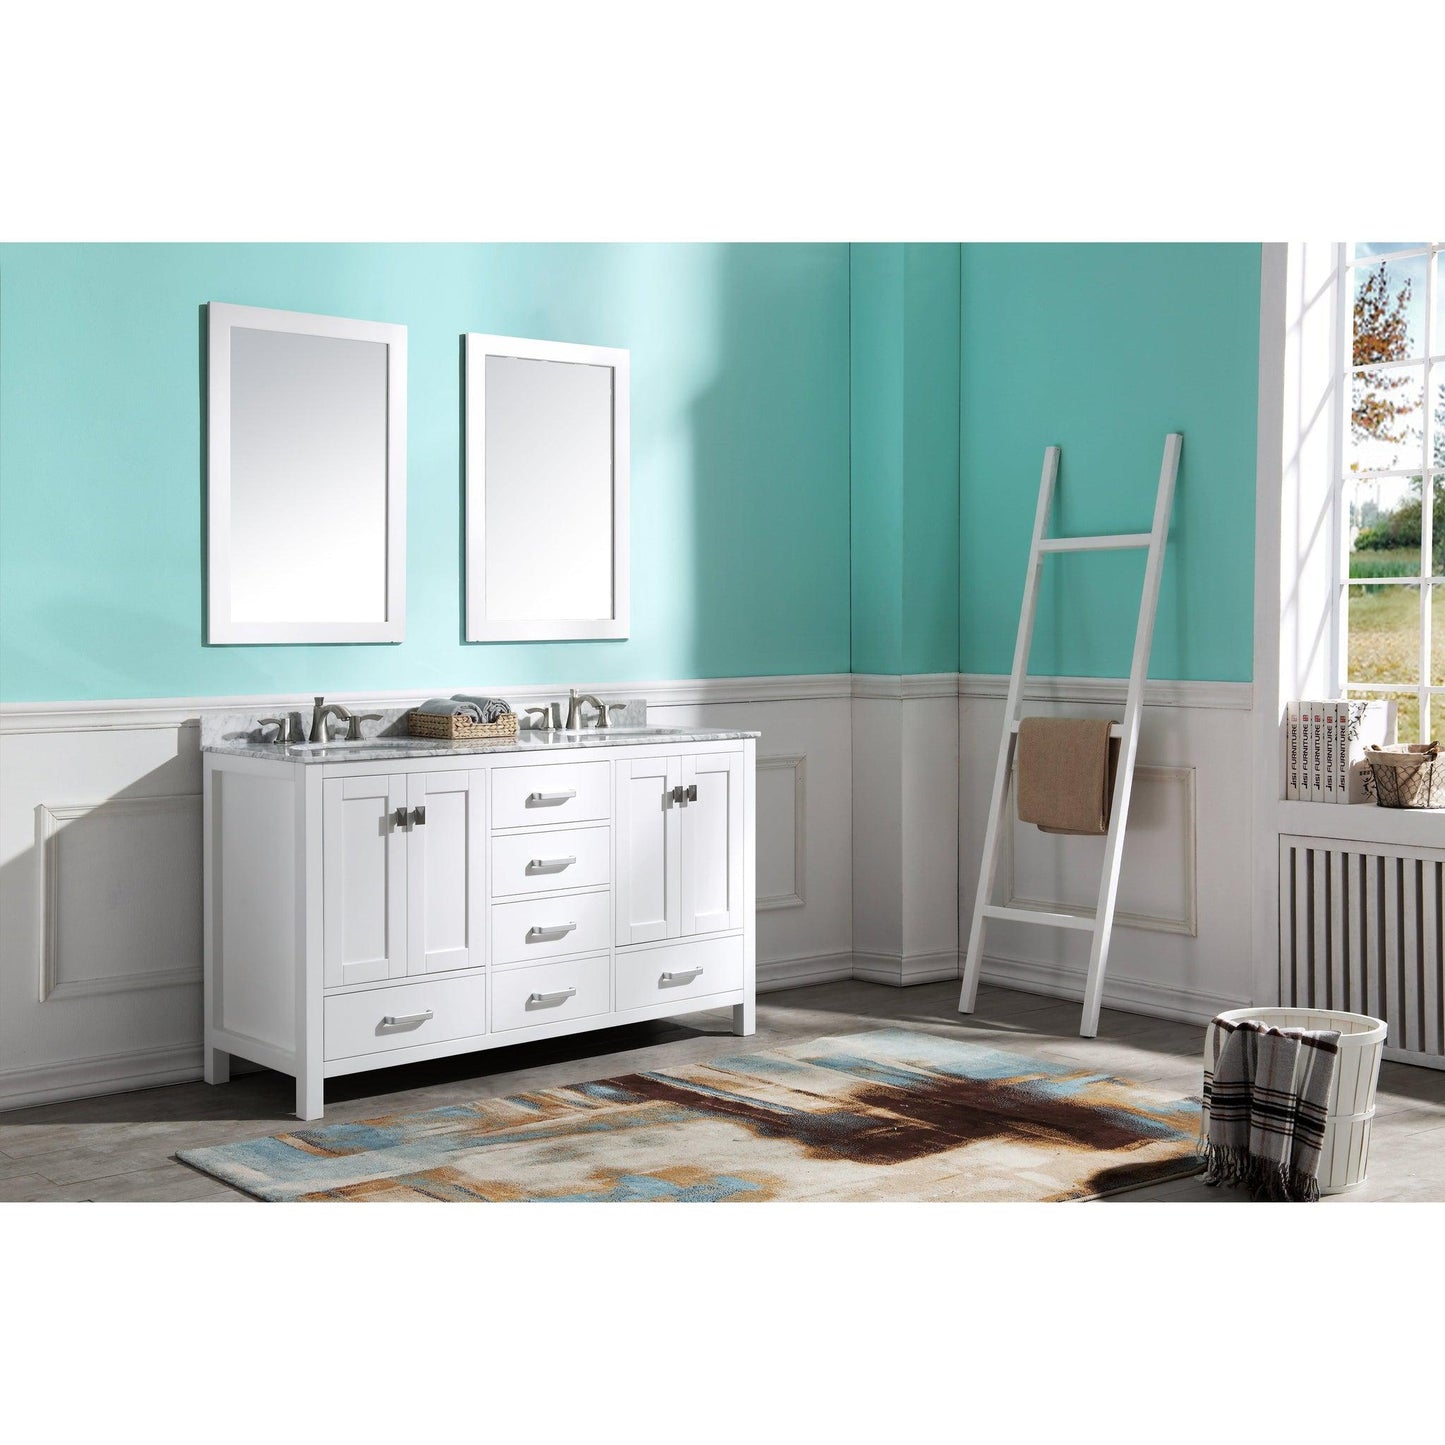 ANZZI Chateau Series 60" x 36" Rich White Solid Wood Bathroom Vanity With White Carrara Marble Countertop, Basin Sink and Mirror